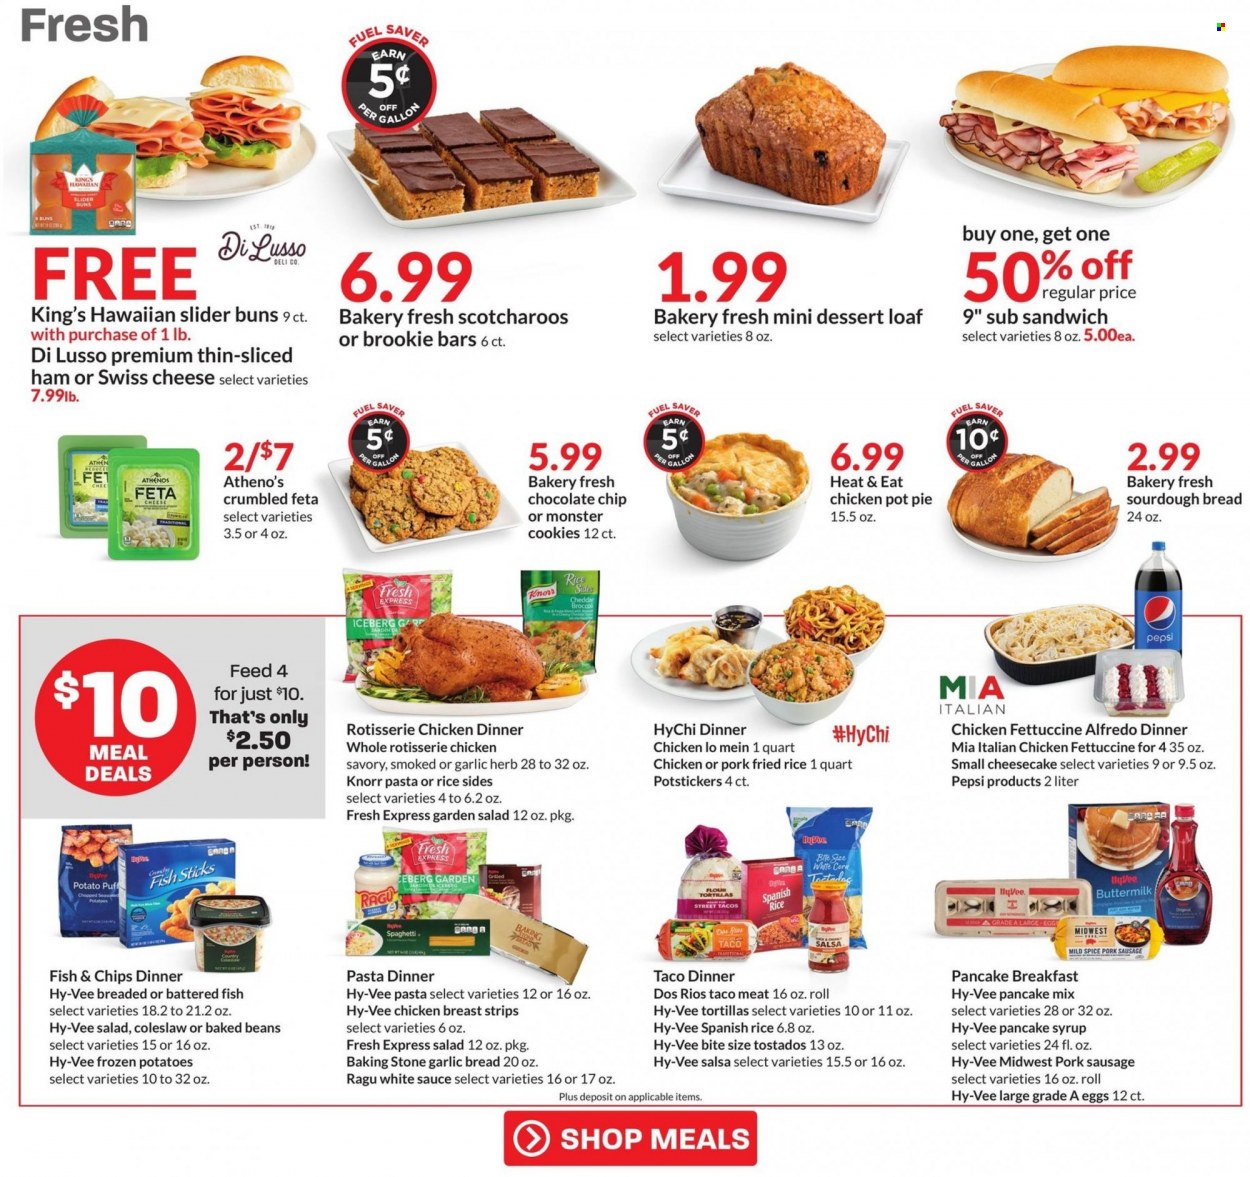 thumbnail - Hy-Vee Flyer - 09/28/2022 - 10/04/2022 - Sales products - bread, tortillas, pie, buns, sourdough bread, flour tortillas, pot pie, cheesecake, beans, potatoes, fish, fish fingers, fish sticks, coleslaw, spaghetti, chicken roast, Knorr, sauce, ham, sausage, pork sausage, swiss cheese, cheese, feta, buttermilk, large eggs, strips, cookies, baked beans, spice, salsa, ragu, pancake syrup, syrup, Pepsi, Monster, gallon, pot. Page 7.